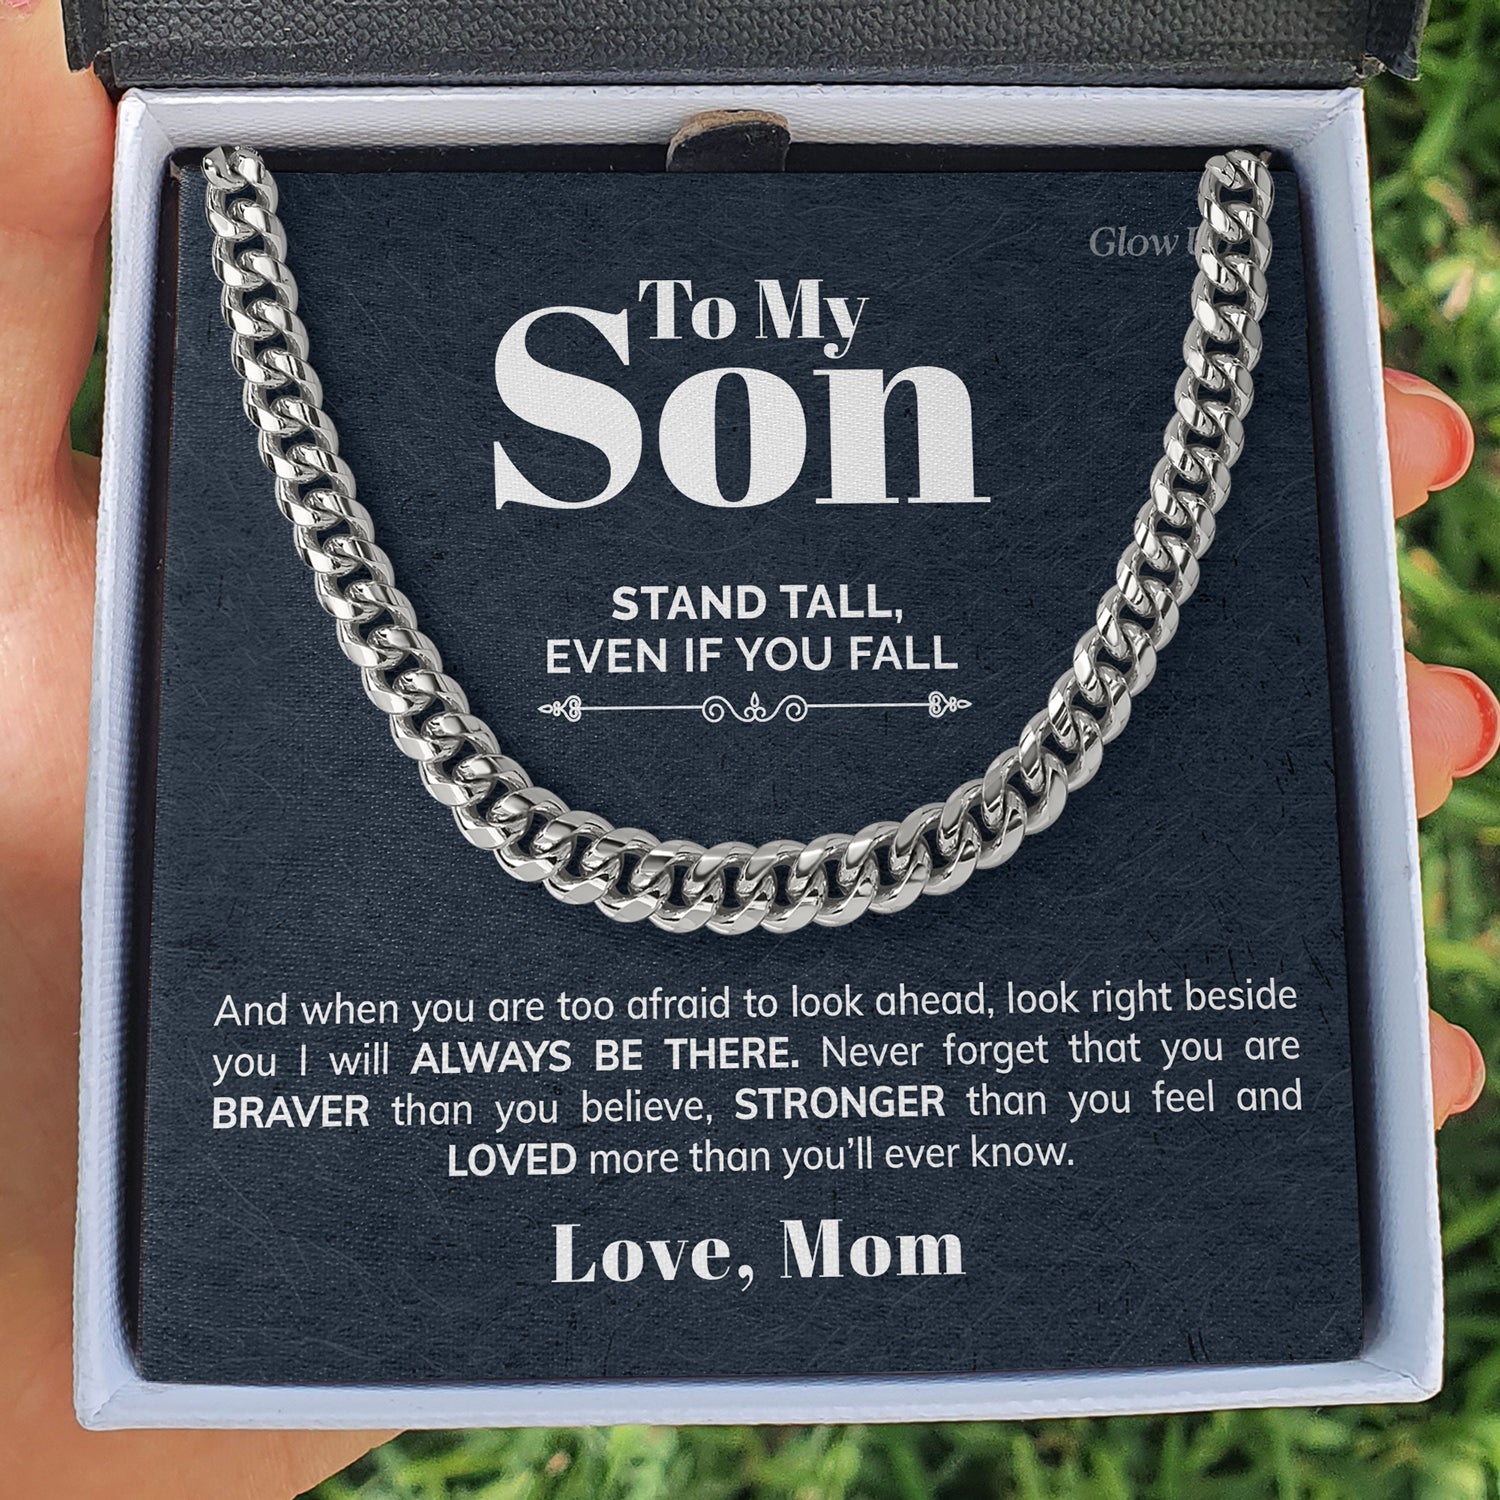 ShineOn Fulfillment Jewelry 316L Stainless Steel / Two-Toned Box To My Son - Stronger than you feel - Cuban Link Chain Necklace